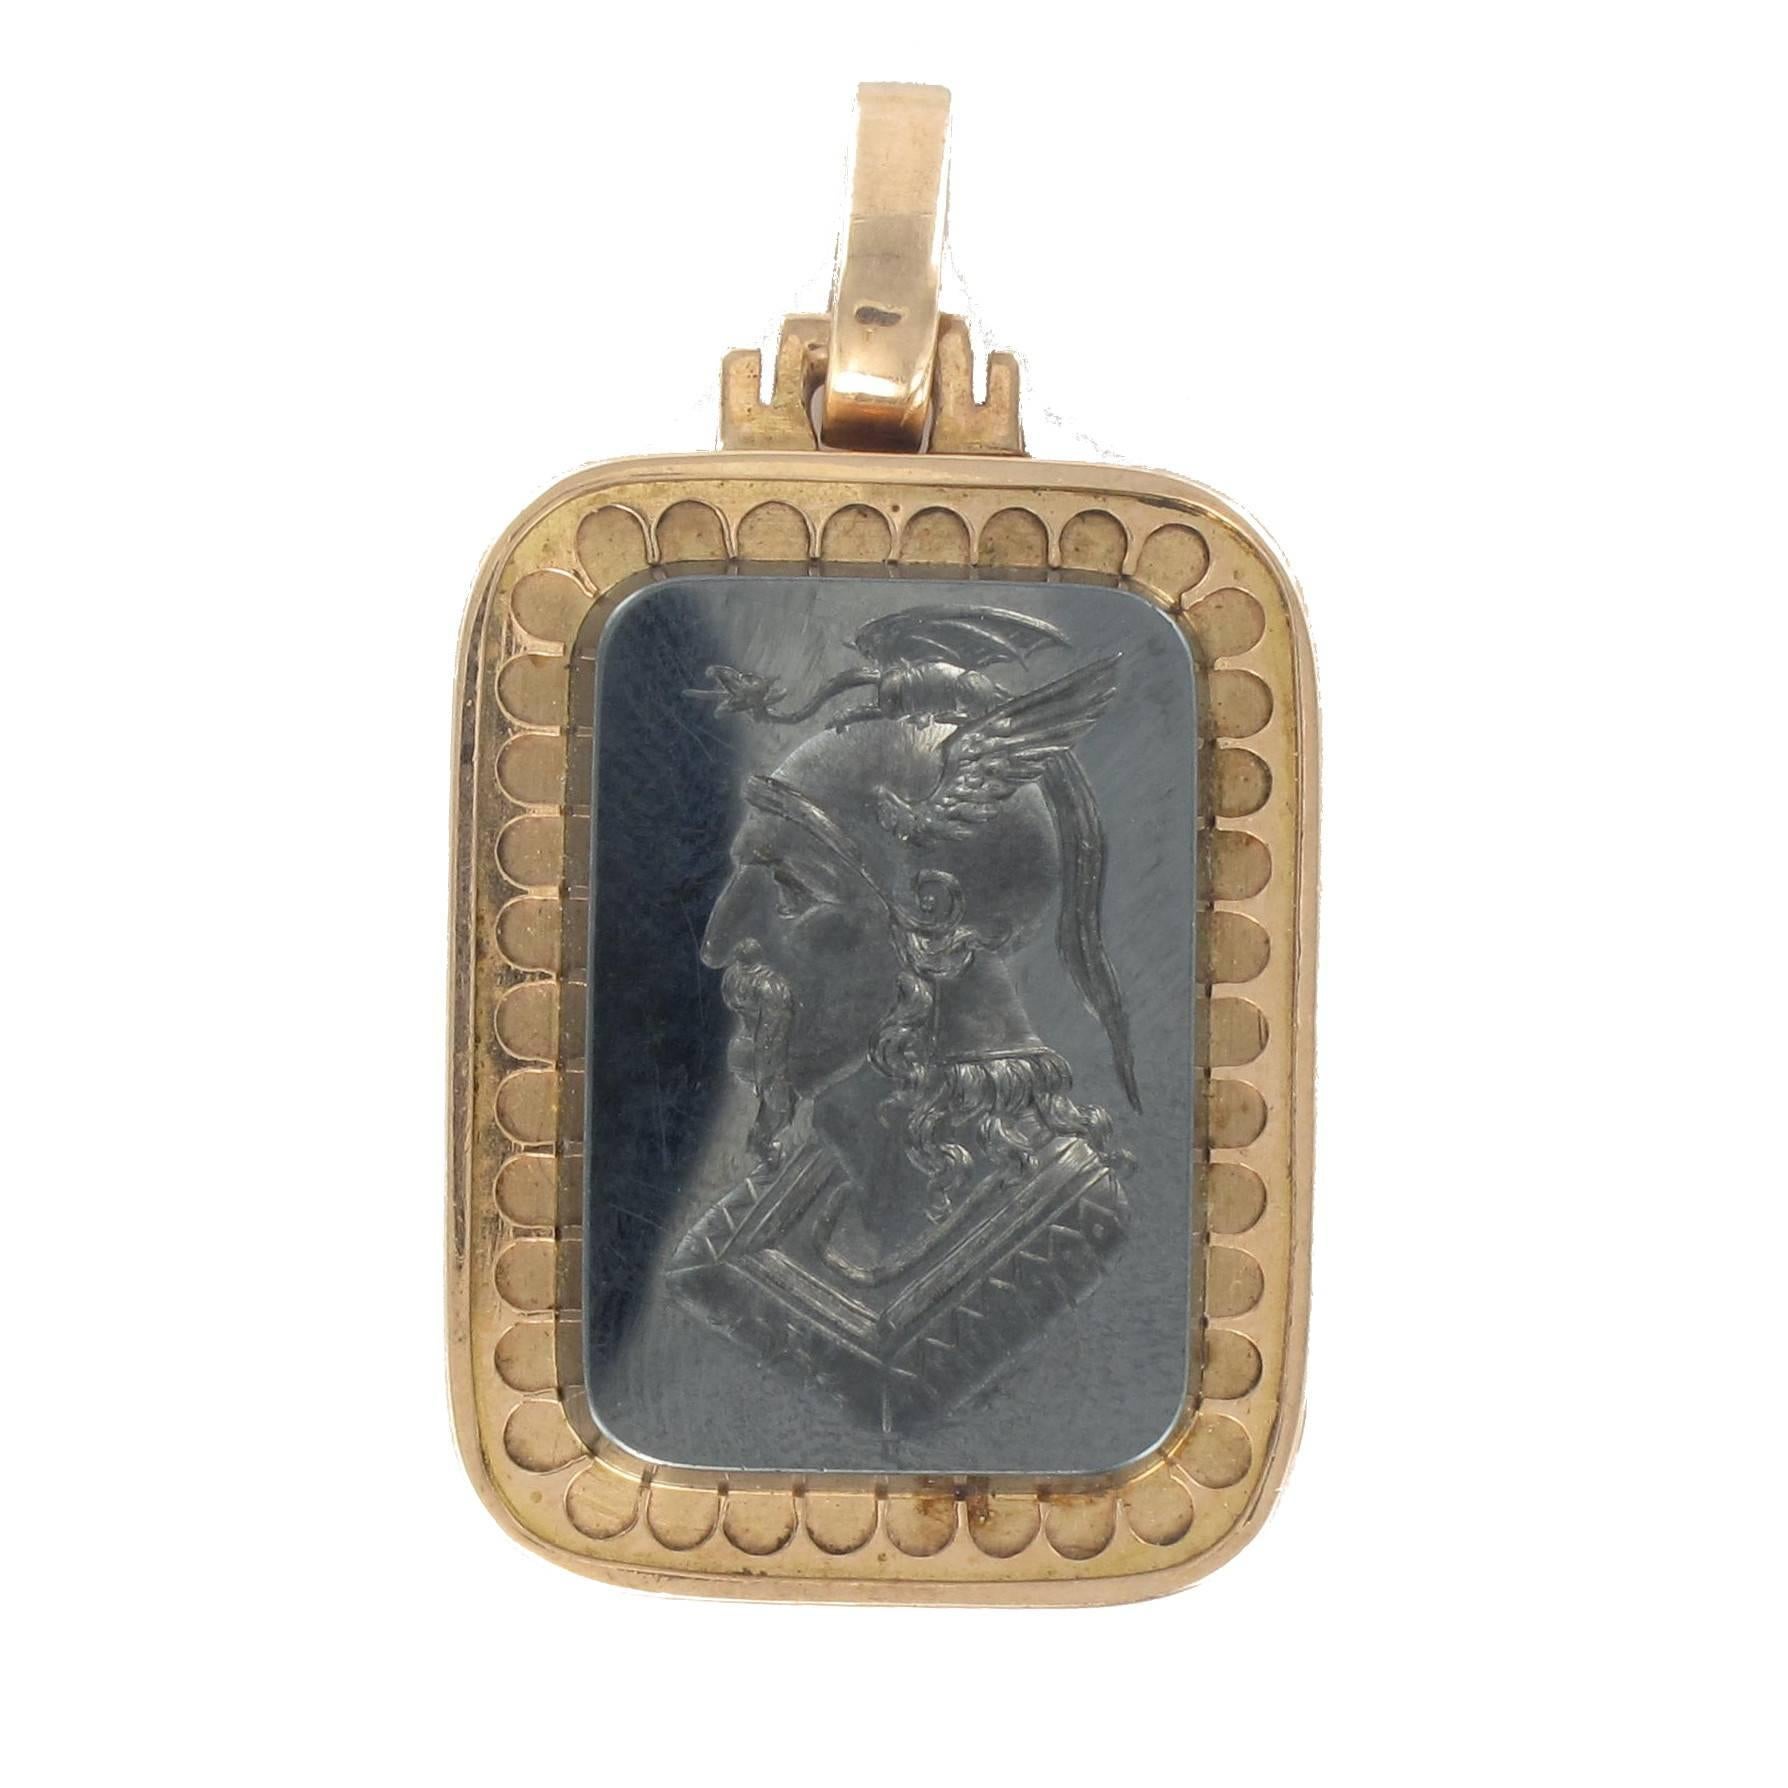 Pendant in 18 carat yellow gold, eagle head hallmark. 

In the form of a rectangle, this splendid and rare medallion pendant has a textured border with a sublime hematite intaglio displaying the profile of a bearded warrior wearing a winged helmet